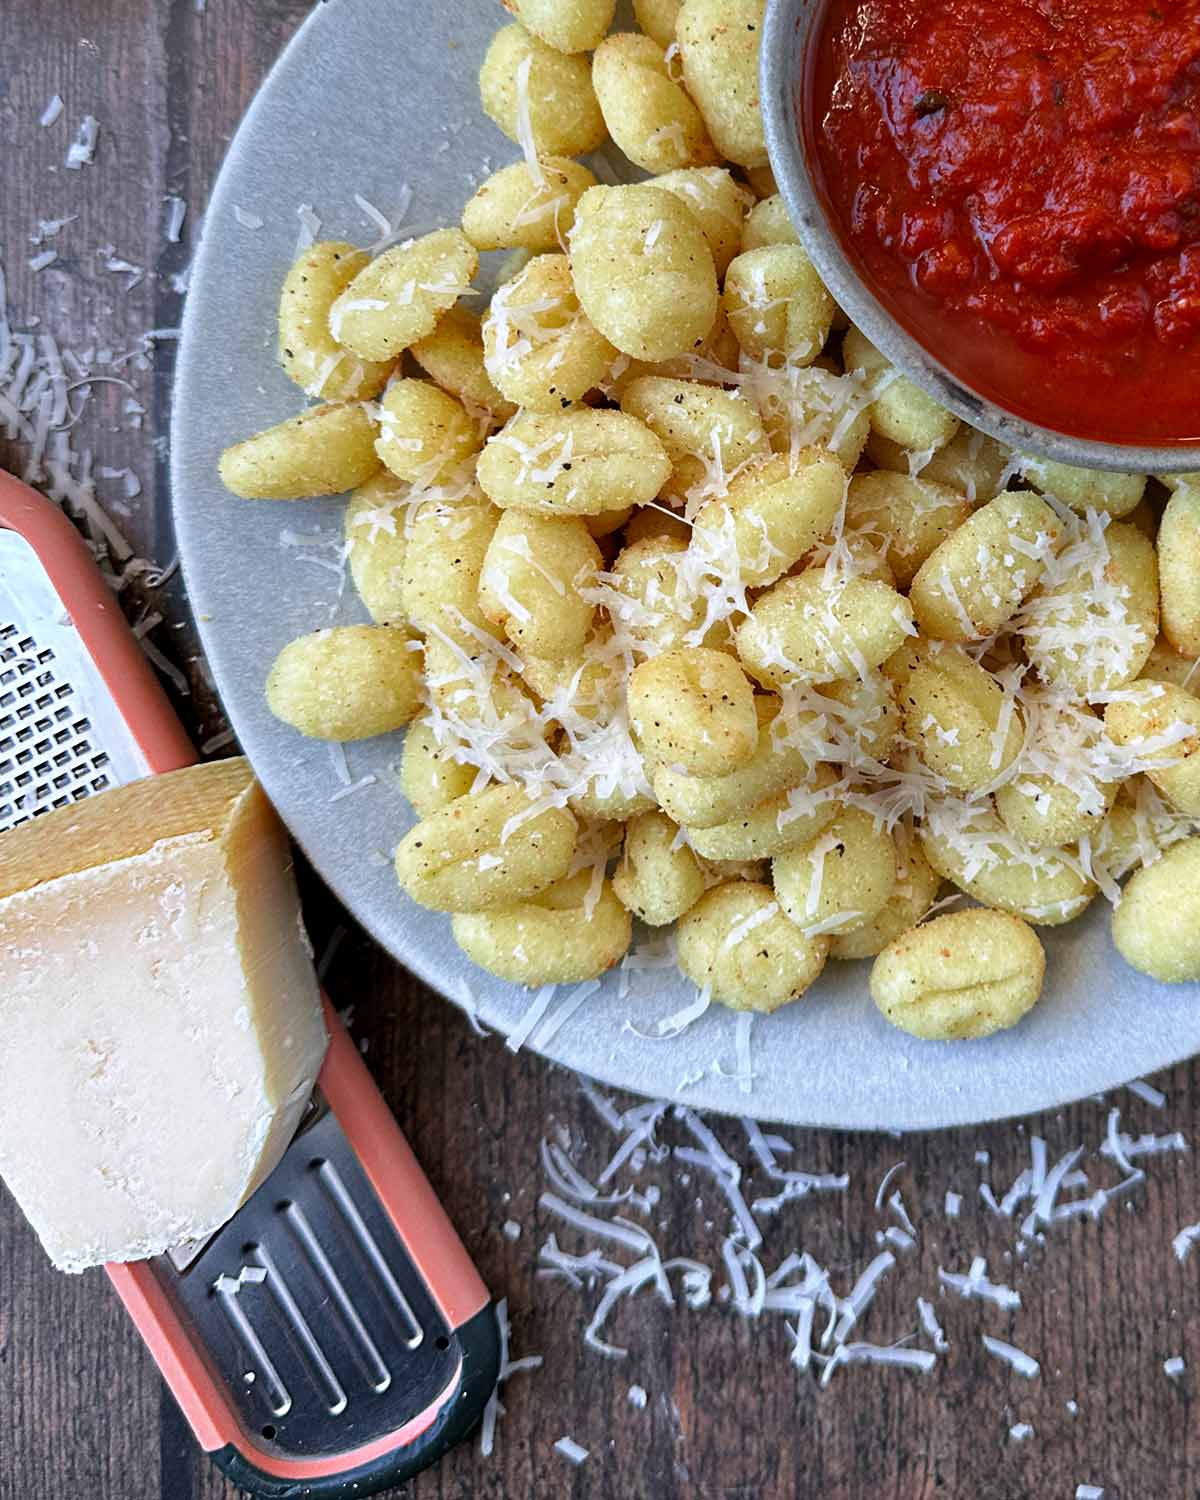 Parmesan grated on top of the cooked gnocchi.